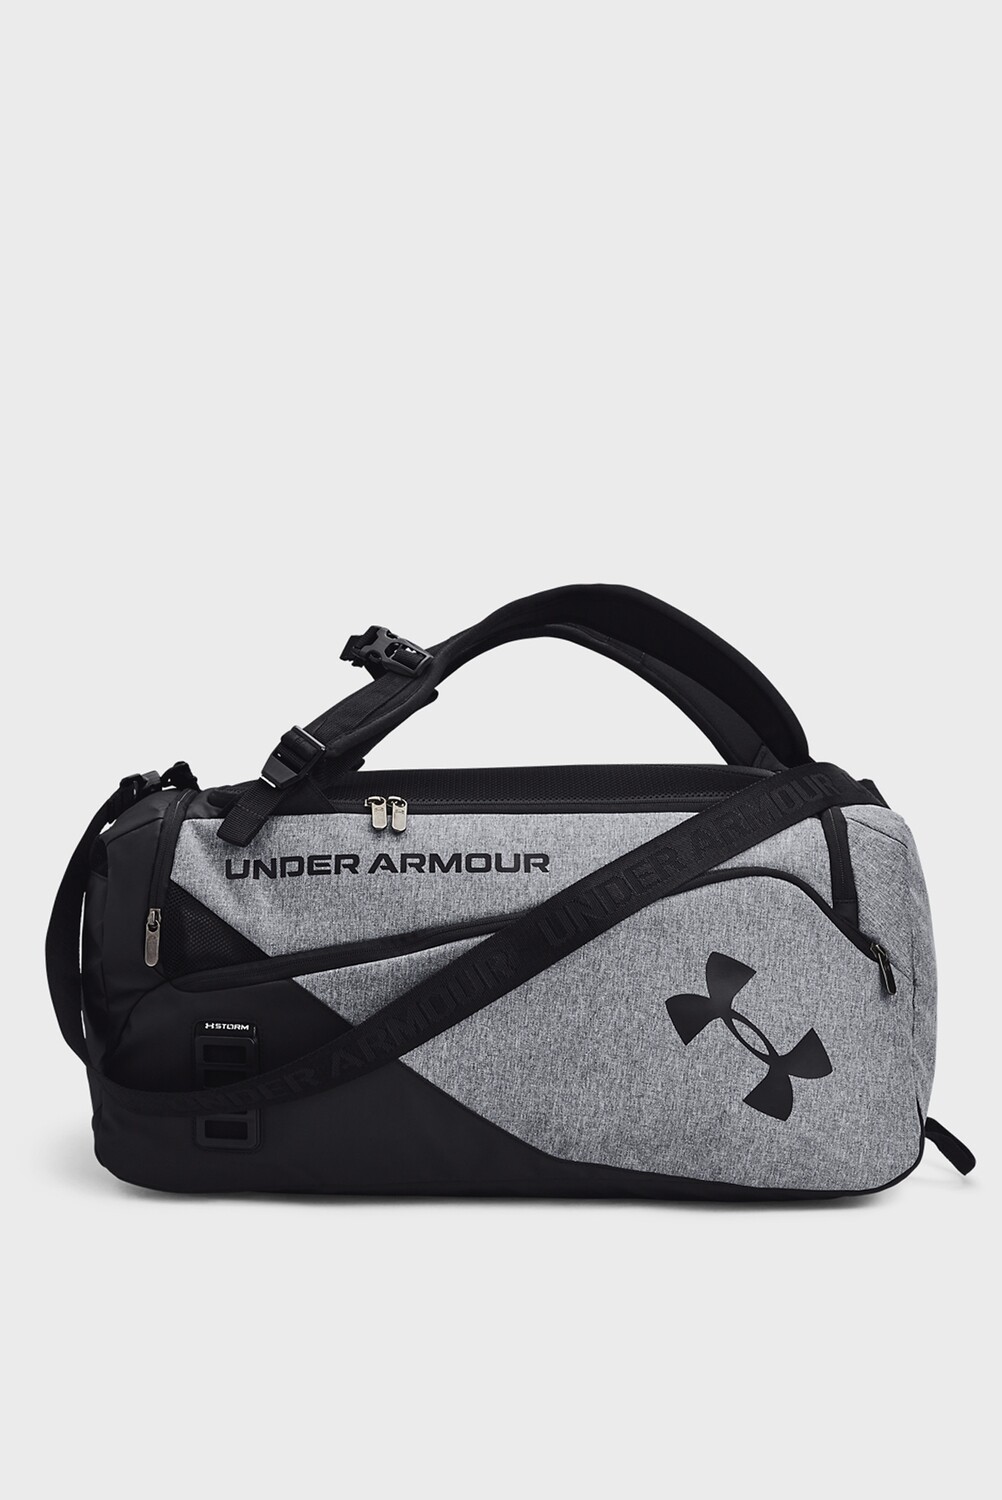 Сумка - рюкзак Unisex UA Contain Duo MD Backpack Duffle Gray/Black Under Armour